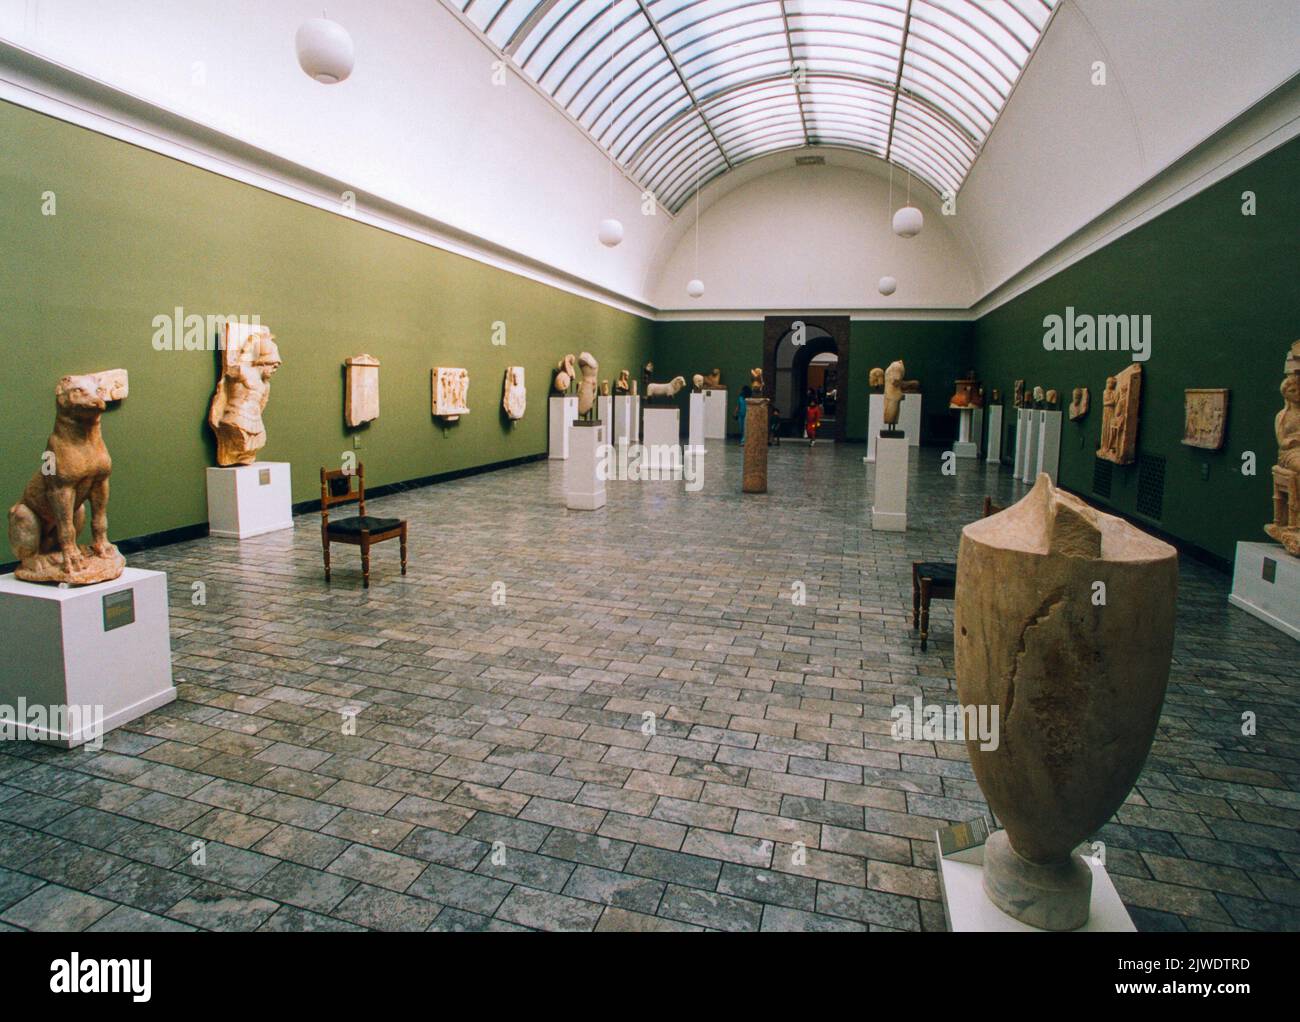 NY CARLSBERG GLYPTOTEK in Copenhagen Denmark artmuseum with ancient sculptures and art represents the private art collectionof Carl JacobsenHall with Roman sculptures Stock Photo